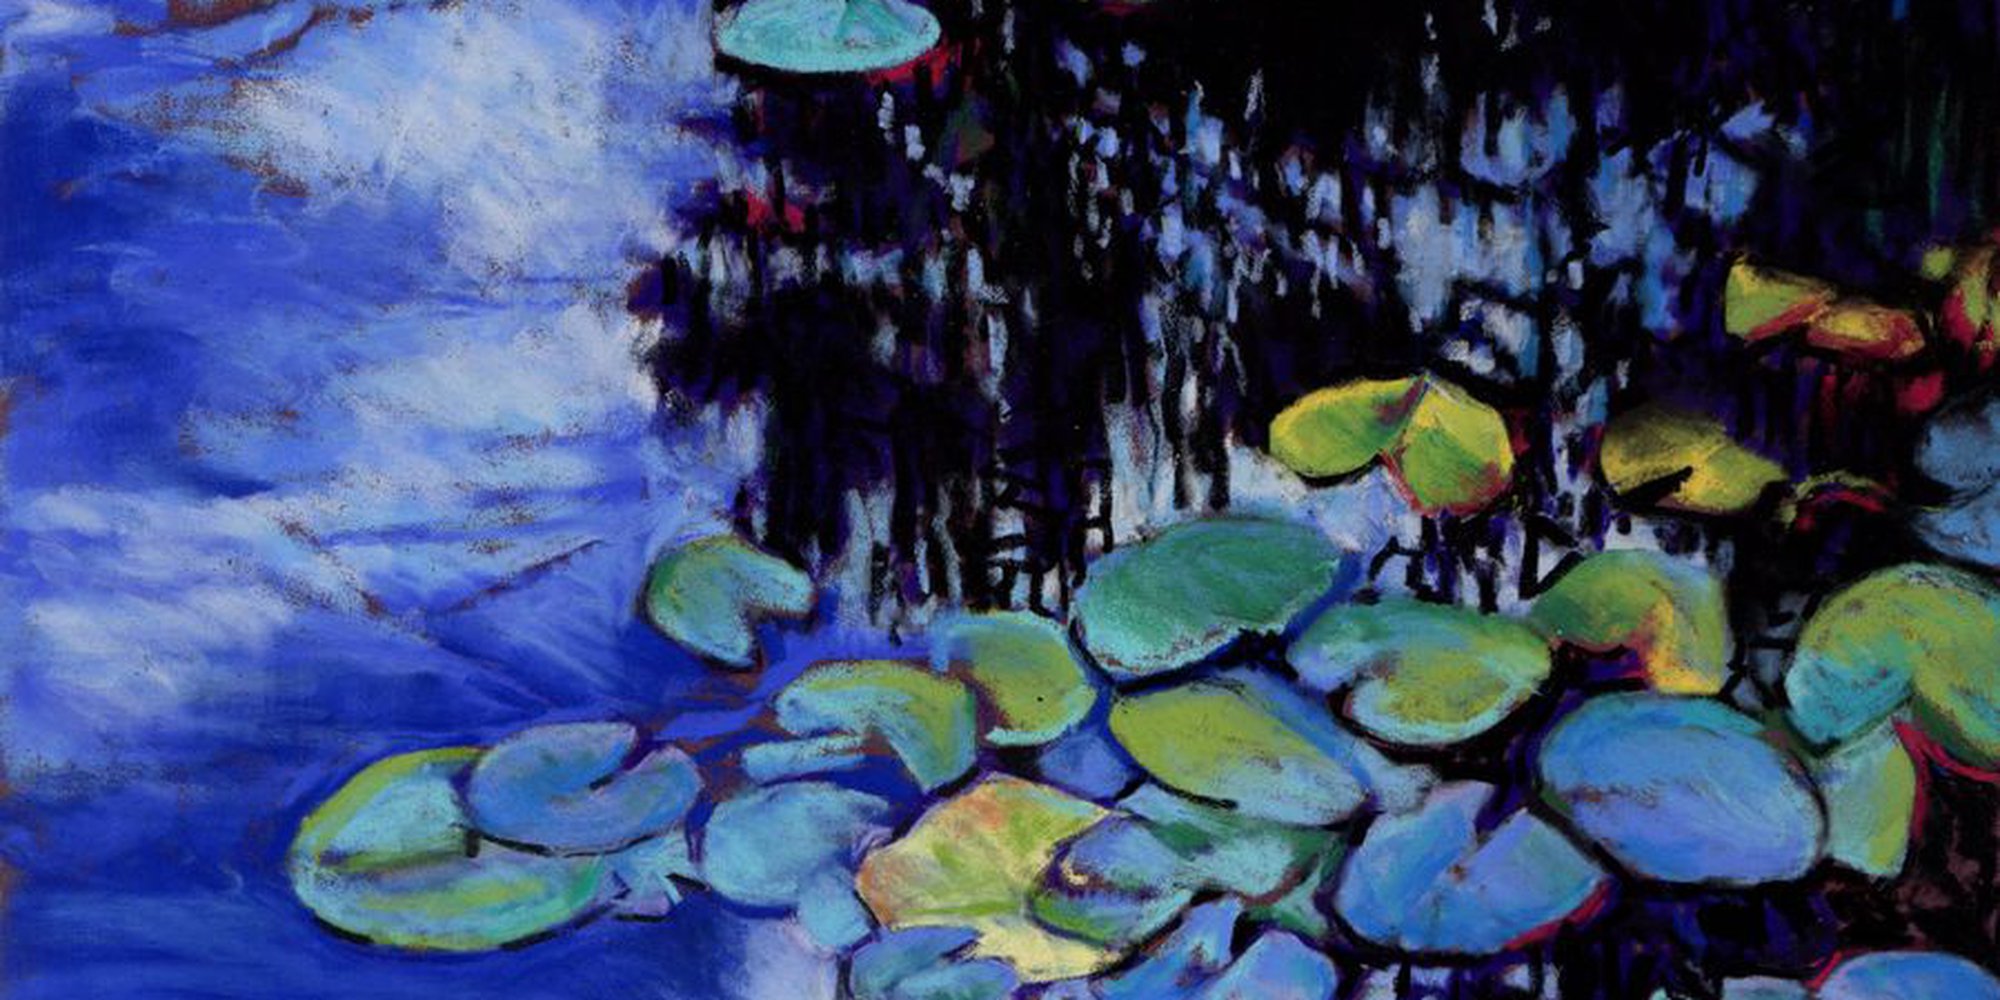 Art of the Day: "Monet's Garden - Lily Pads, 2017" by Zoe Elizabeth Norman